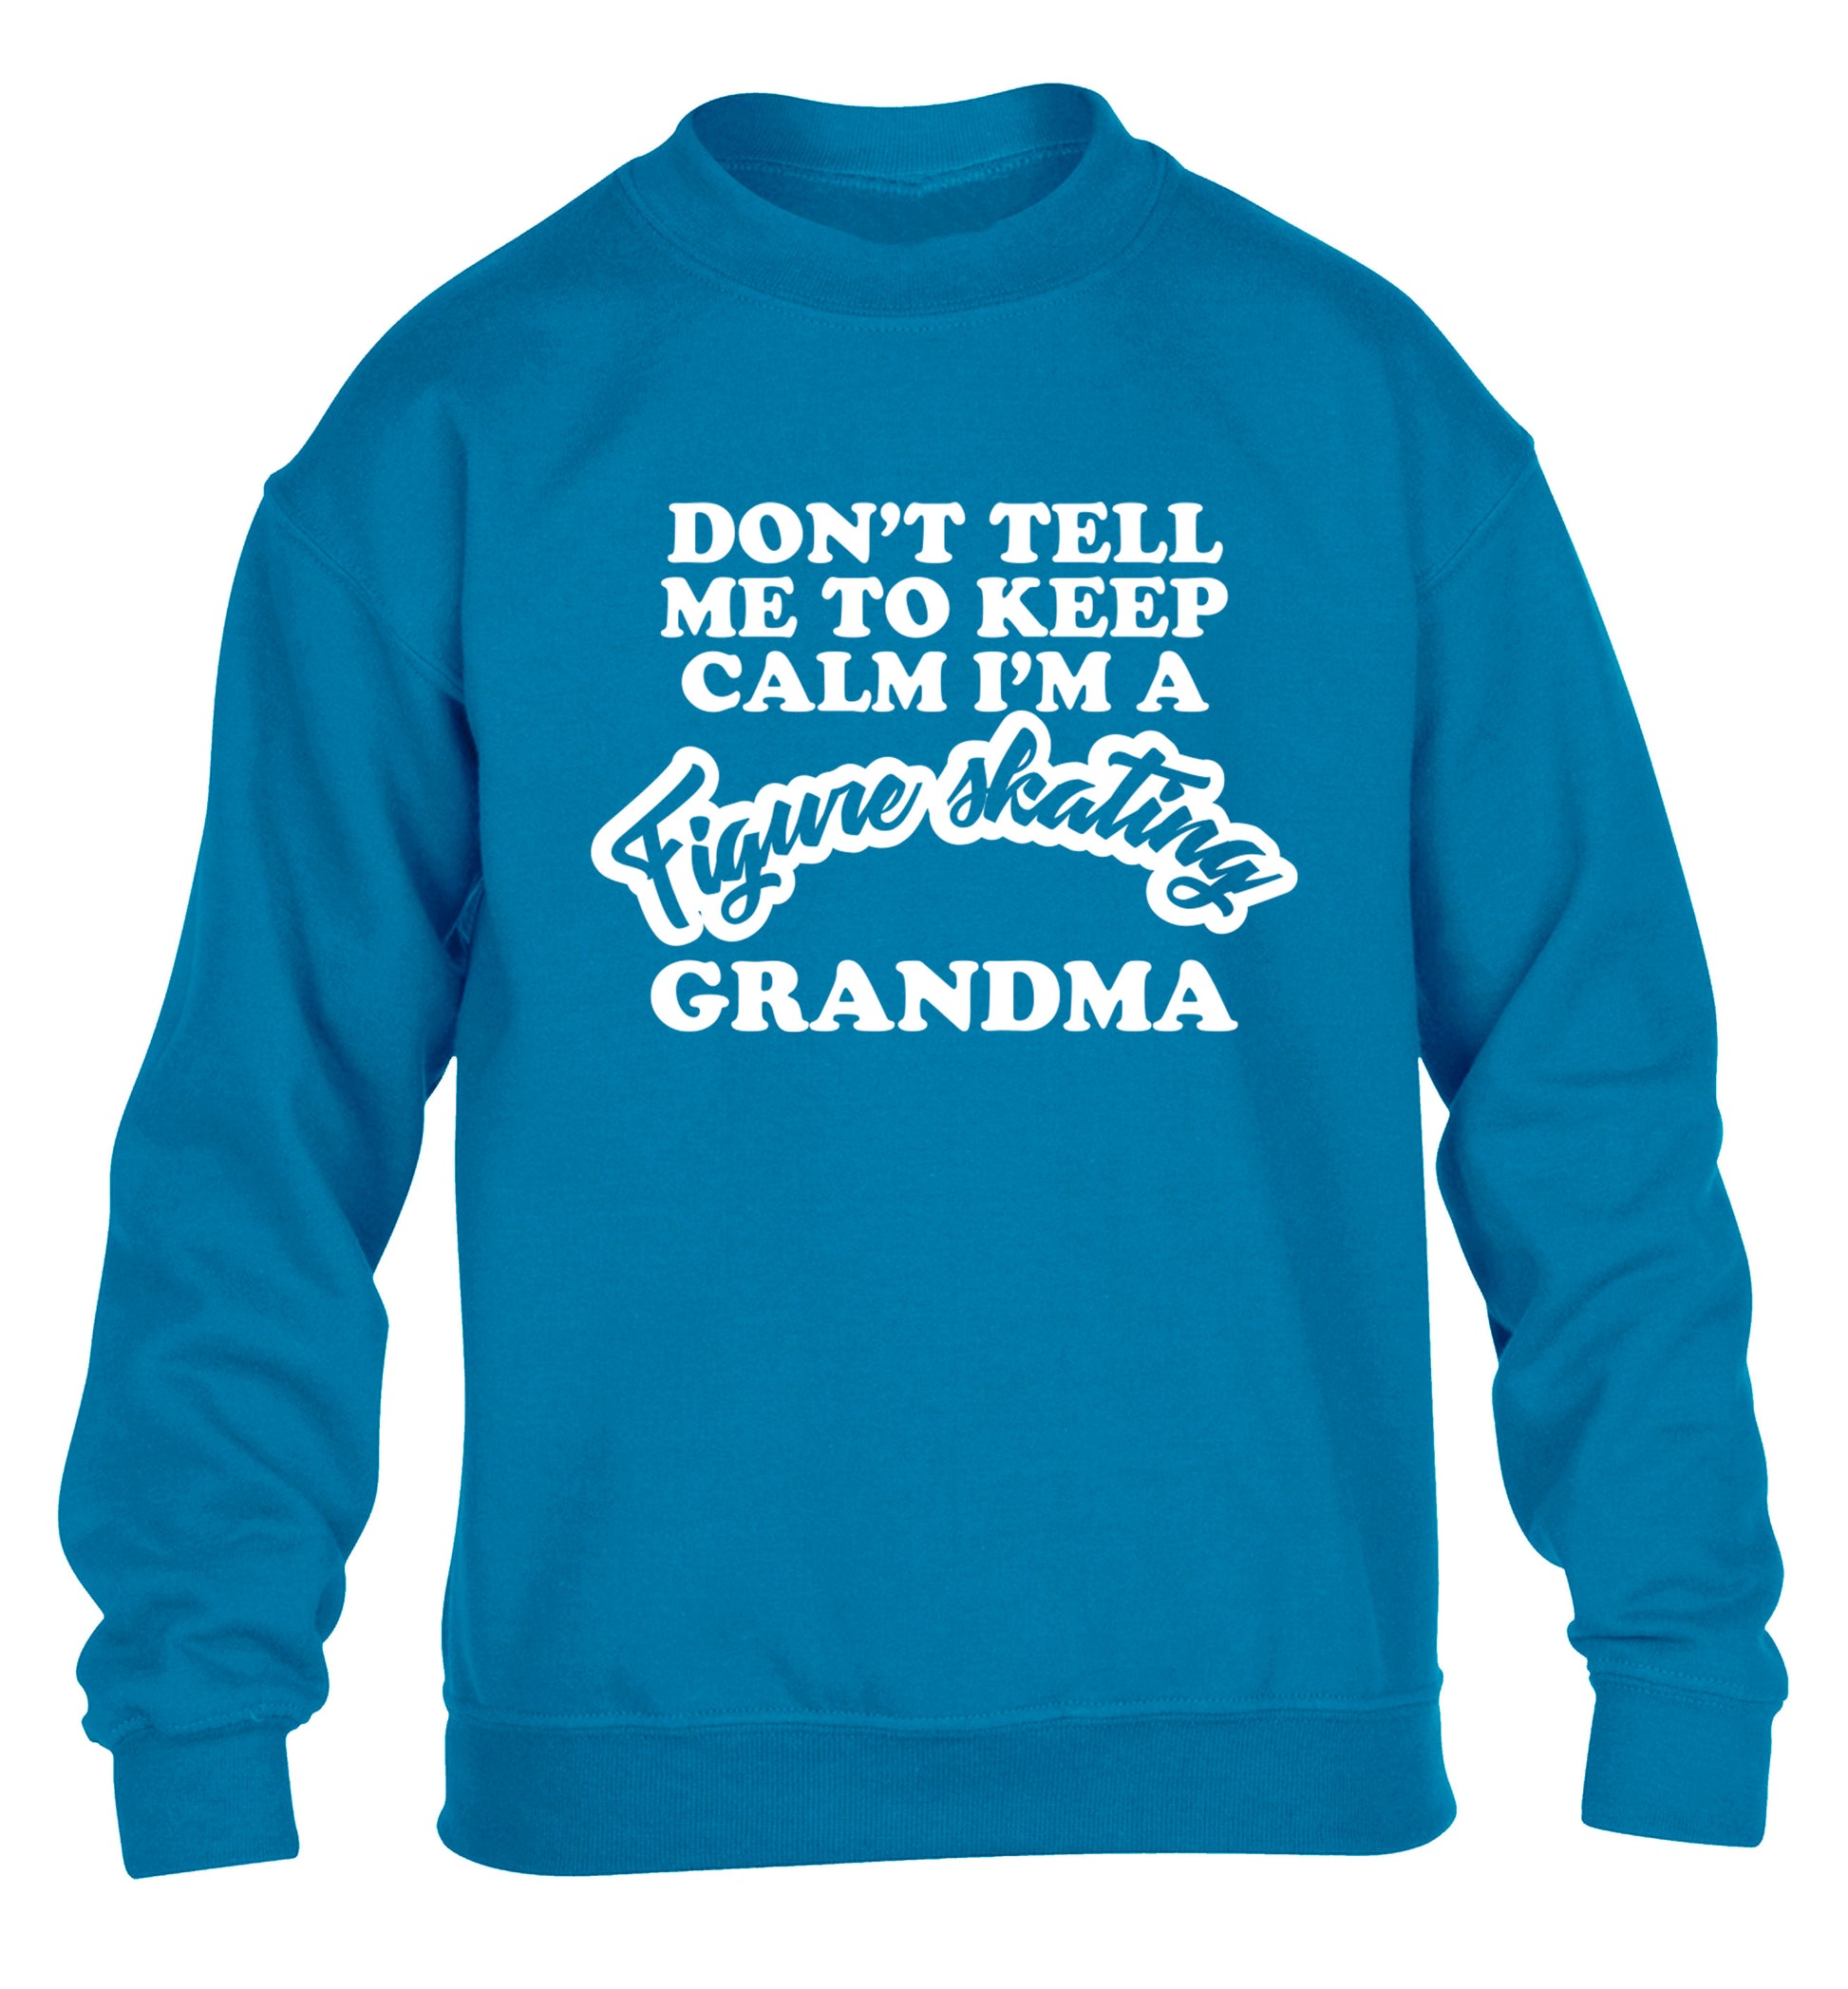 Don't tell me to keep calm I'm a figure skating grandma children's blue sweater 12-14 Years